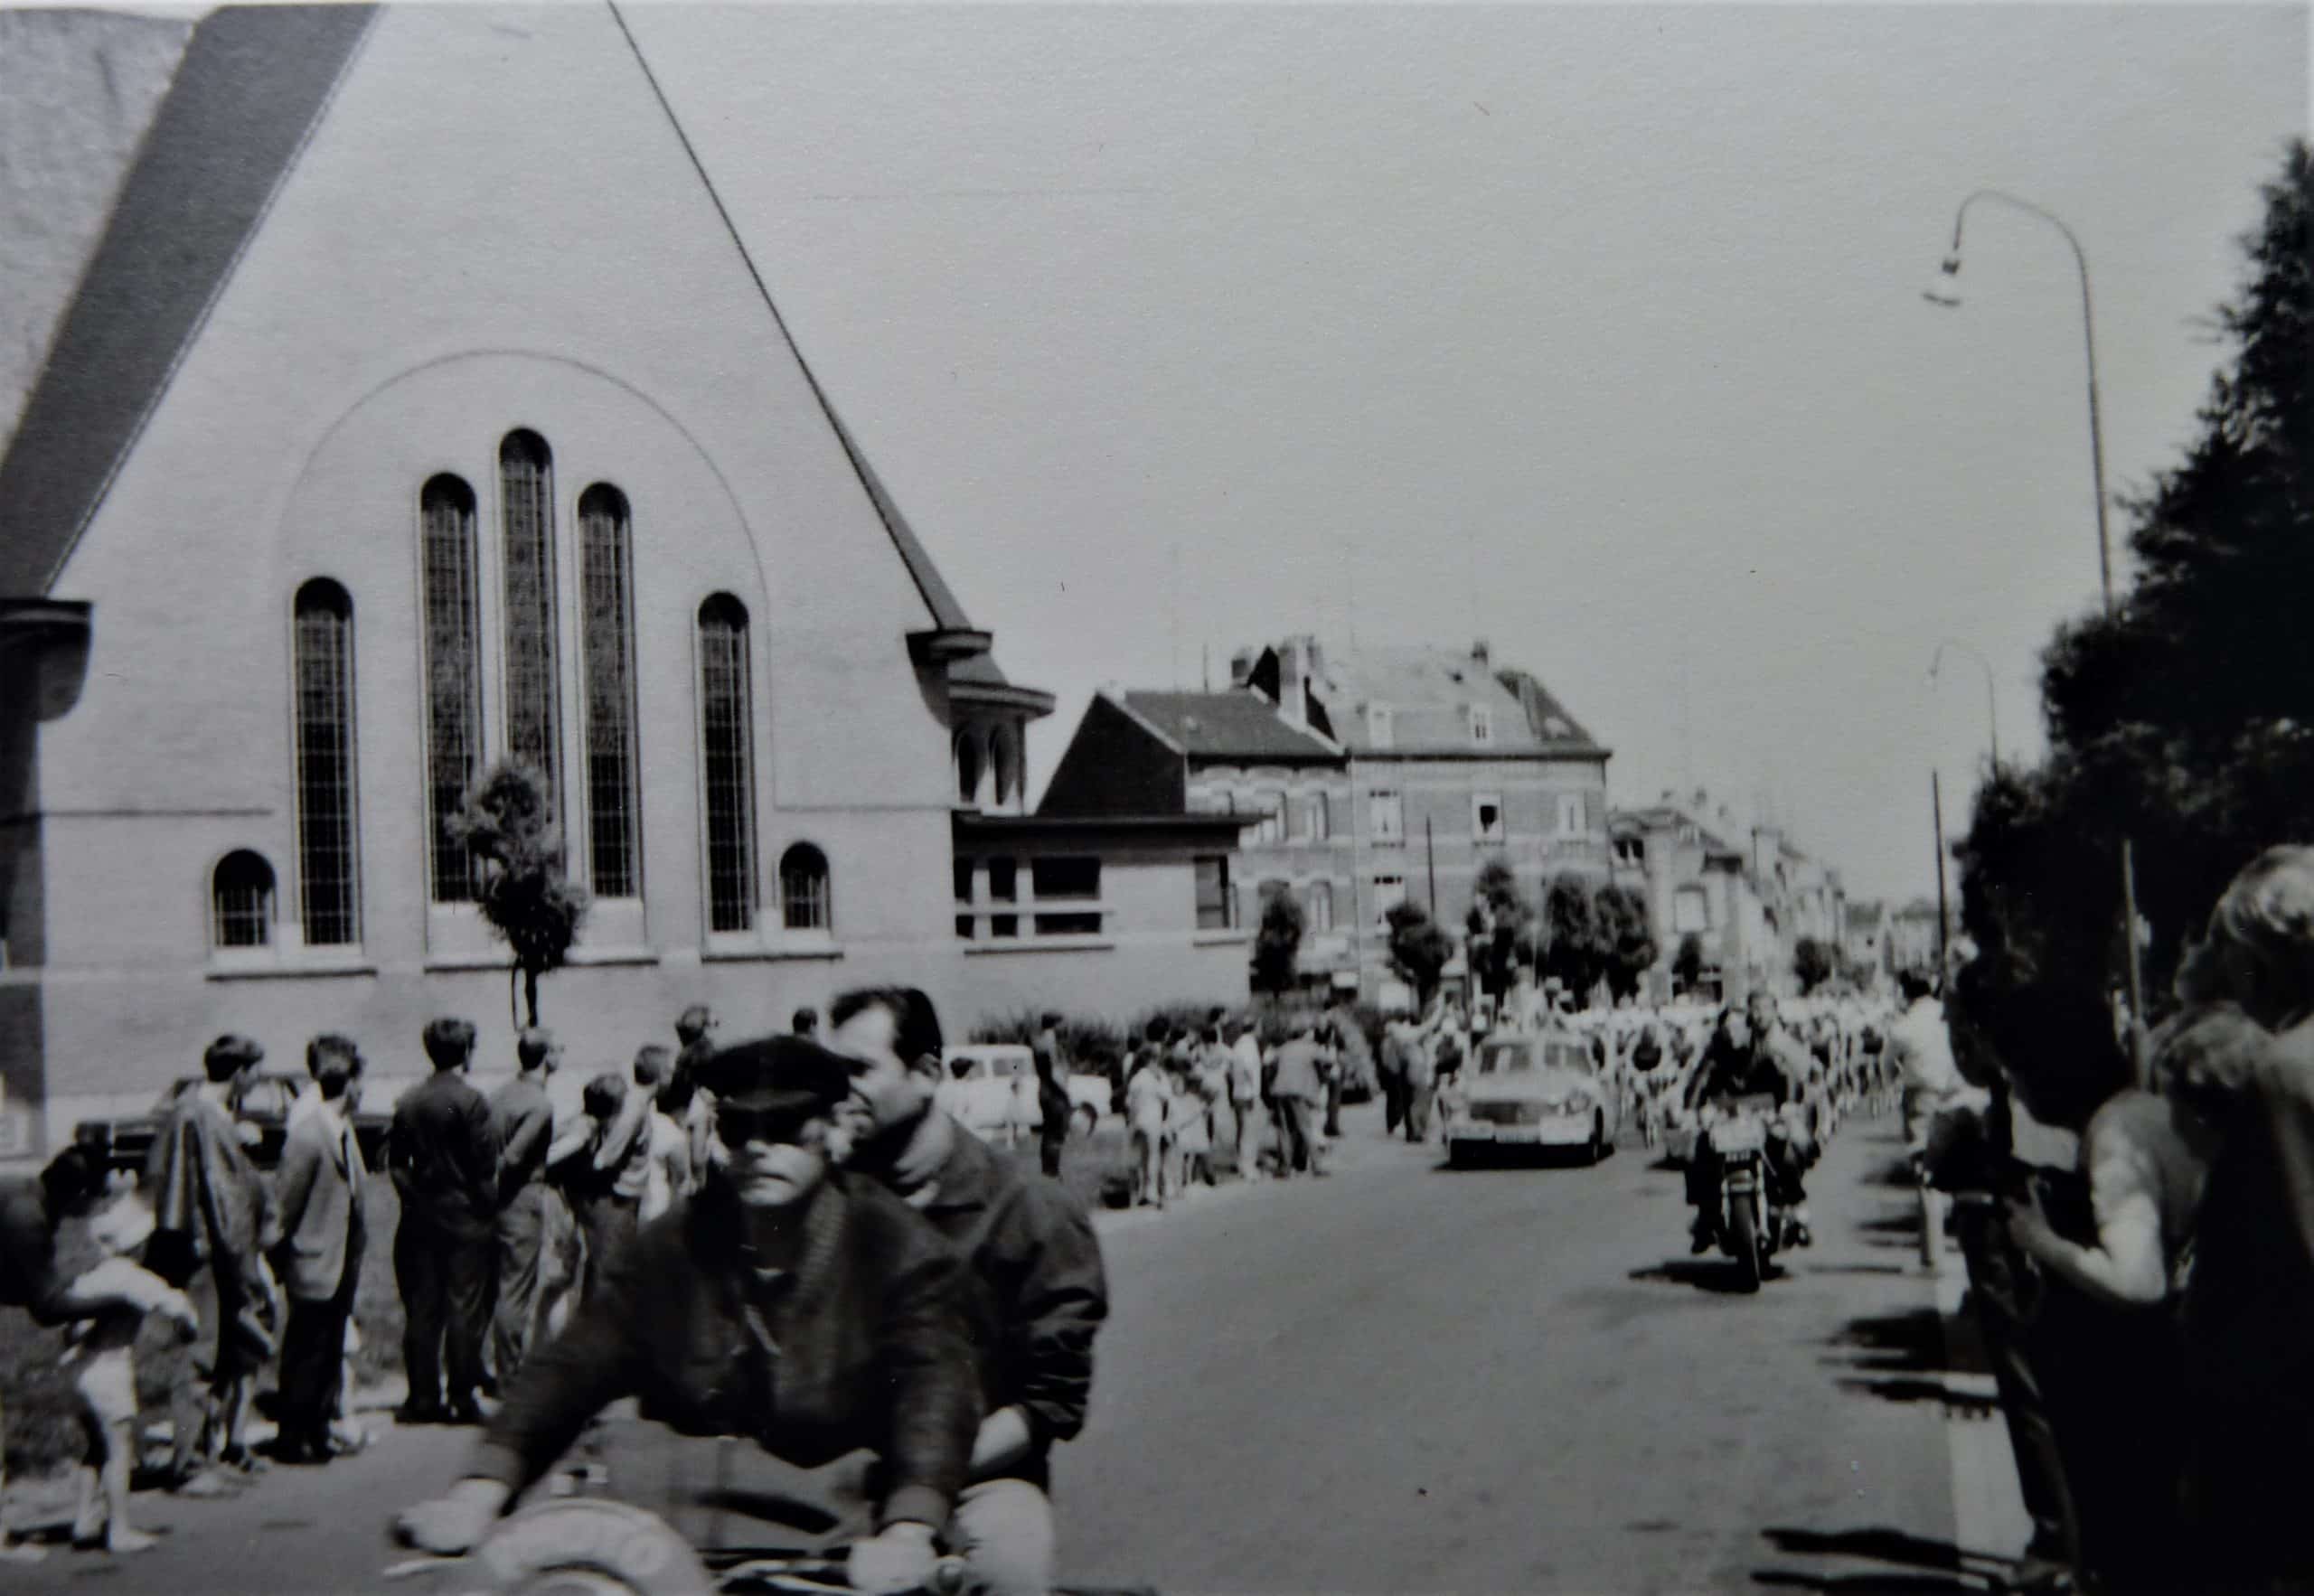 The Tour de France passes through Anderlecht in 1968. Photo courtesy of Christian Polfliet, colorized and enhanced by MyHeritage